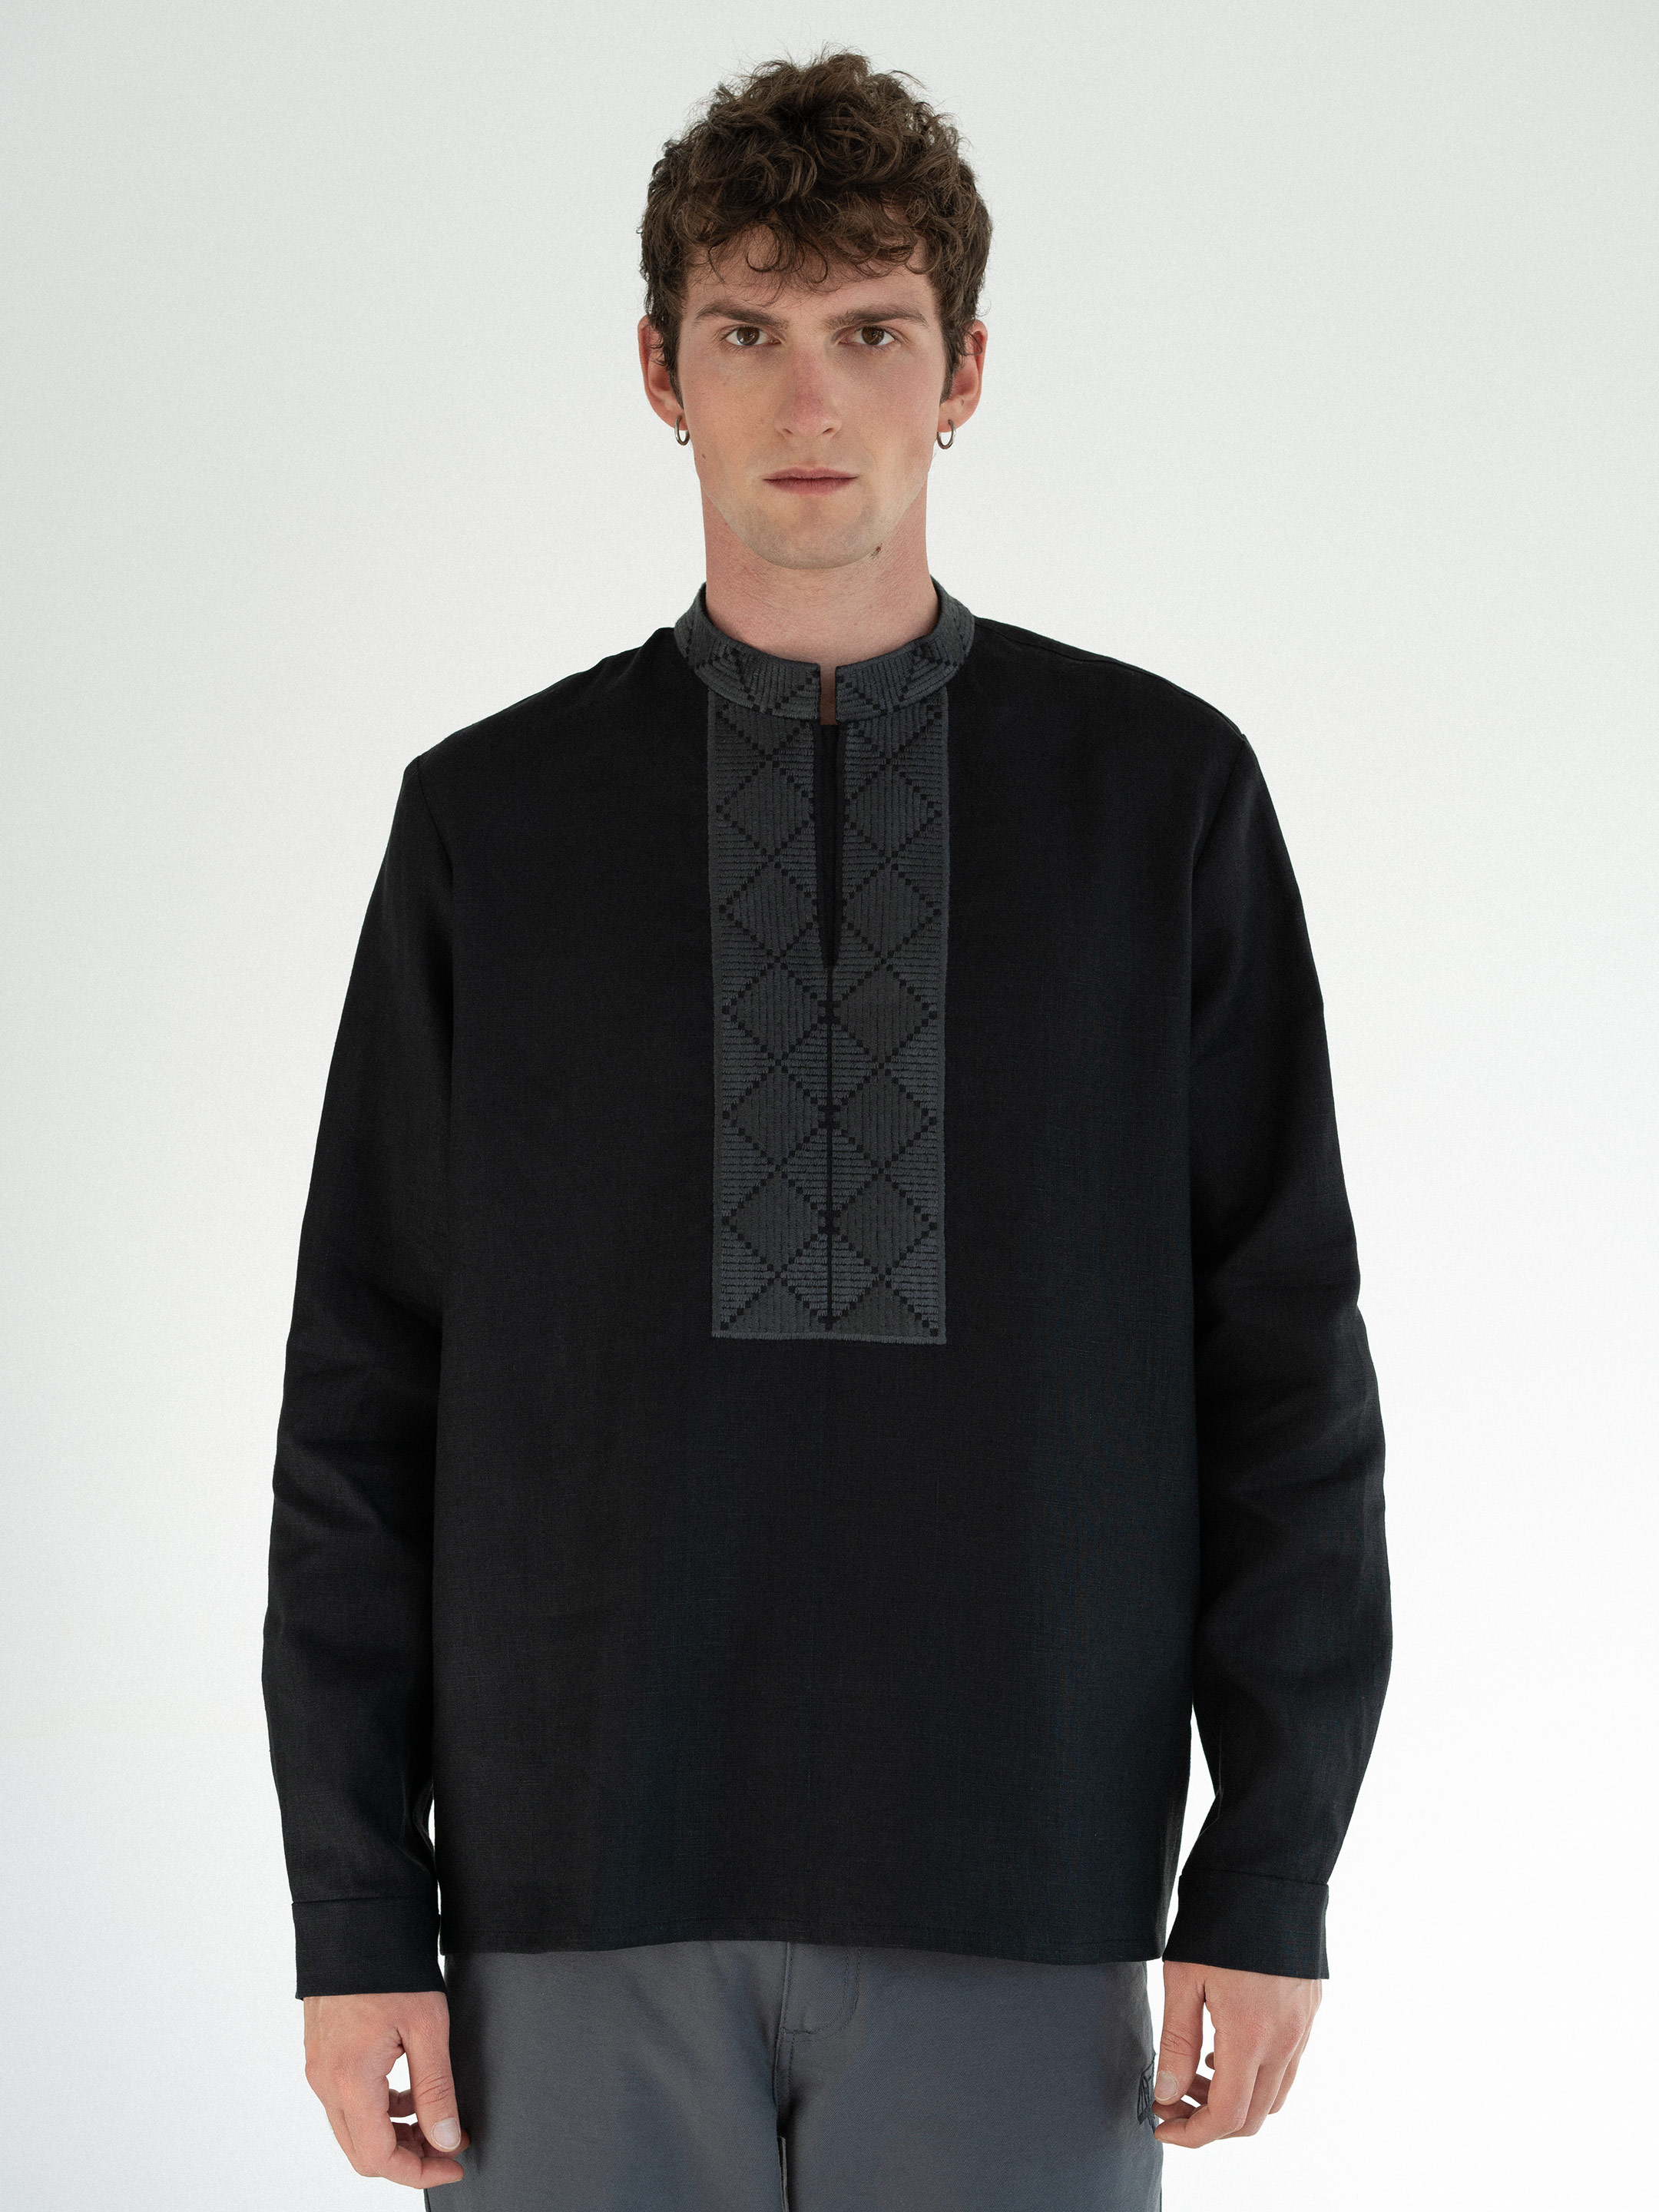 Black linen shirt with embroidered black rhombuses ED17 Black - photo 2